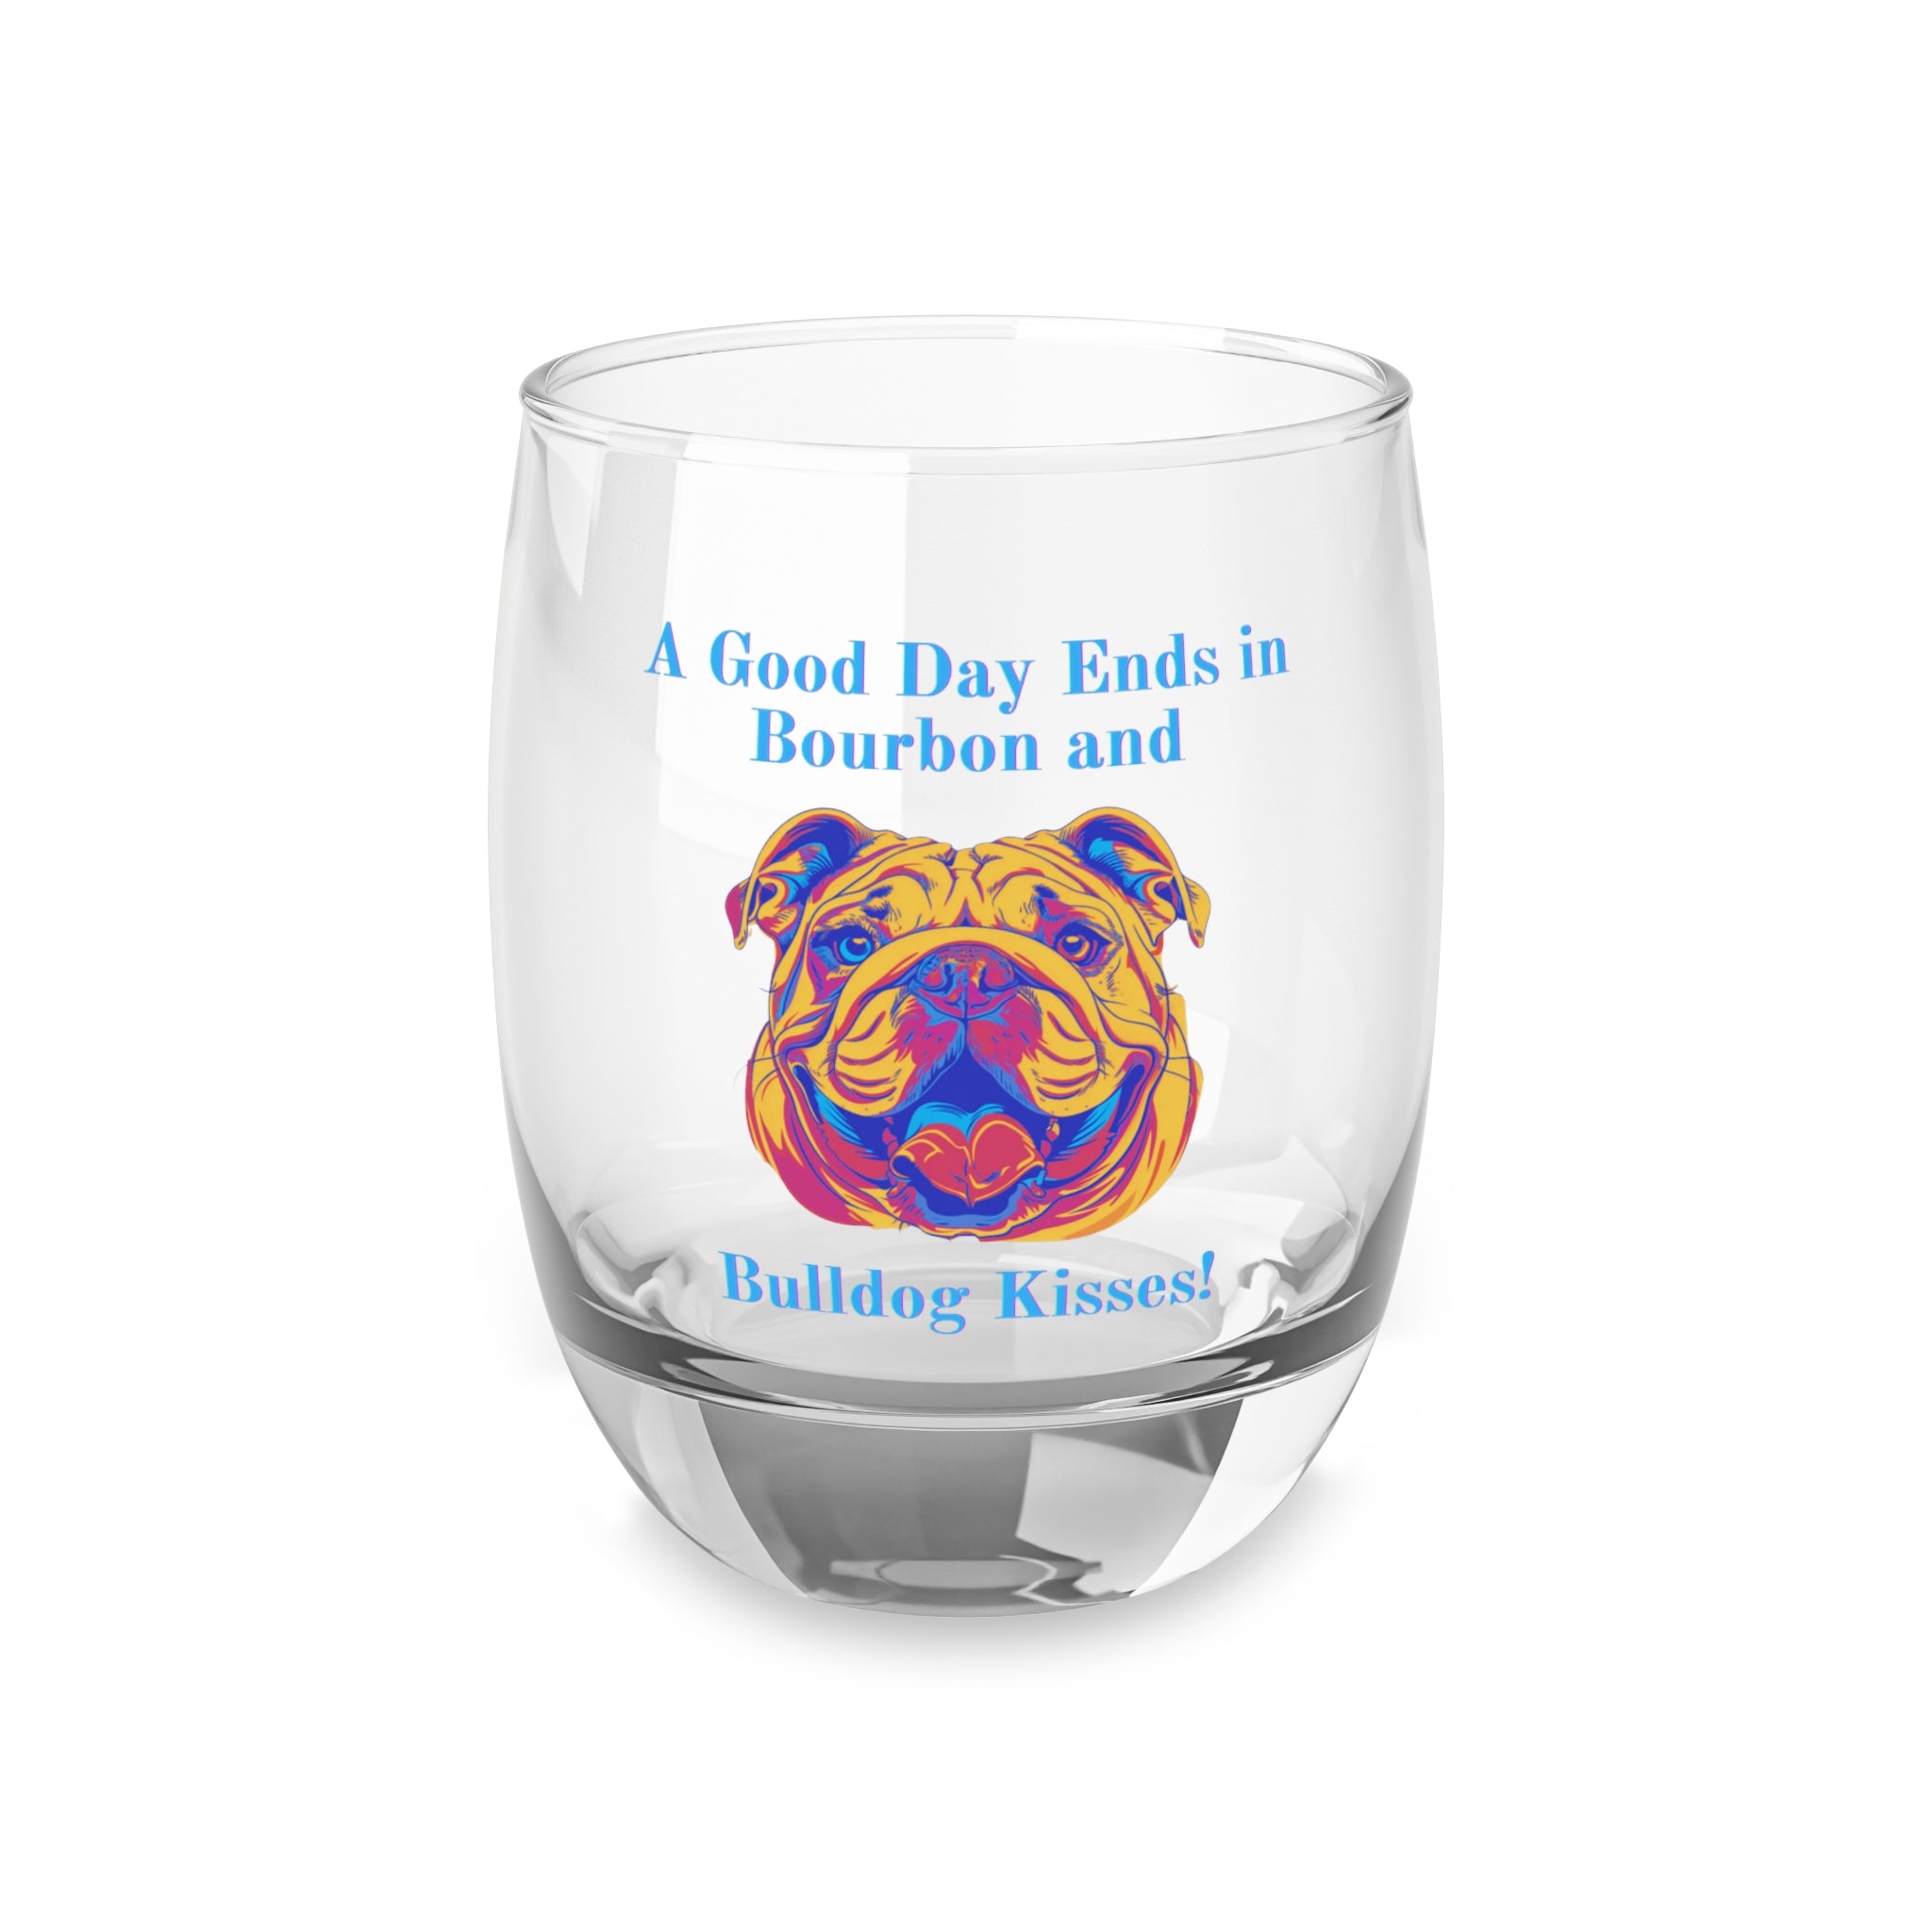 Tipsy Bully Good Day Ends in Bourbon and Bulldog Kisses!: Whiskey/Bourbon Glass (English)